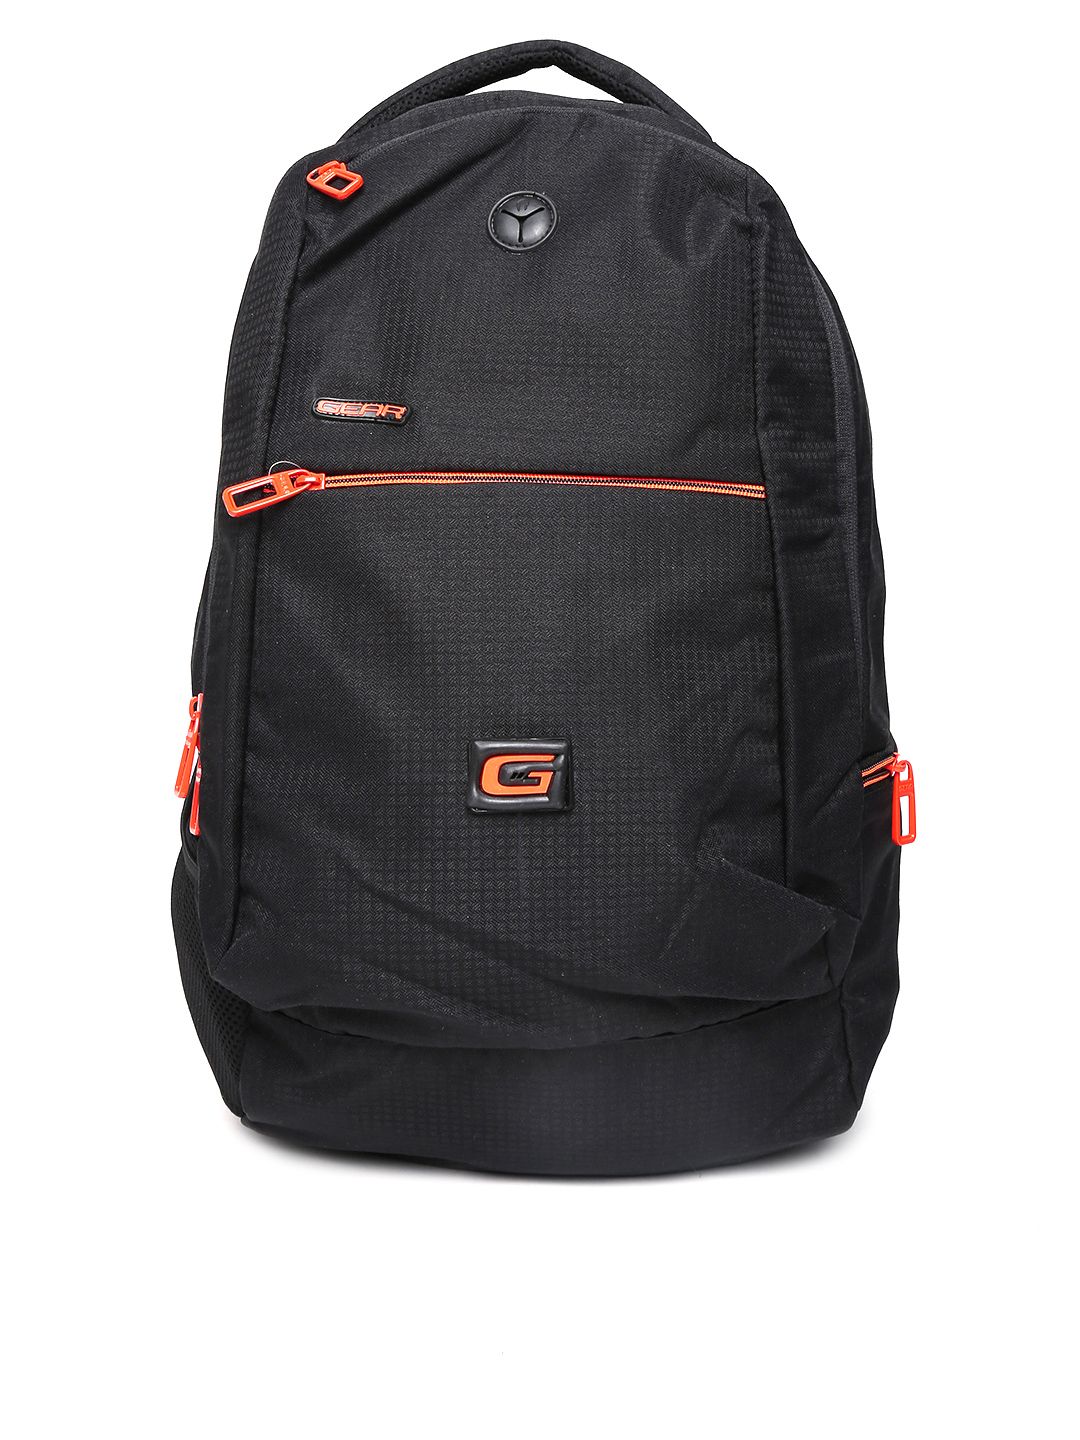 Gear Unisex Black Space 4 Backpack Price in India